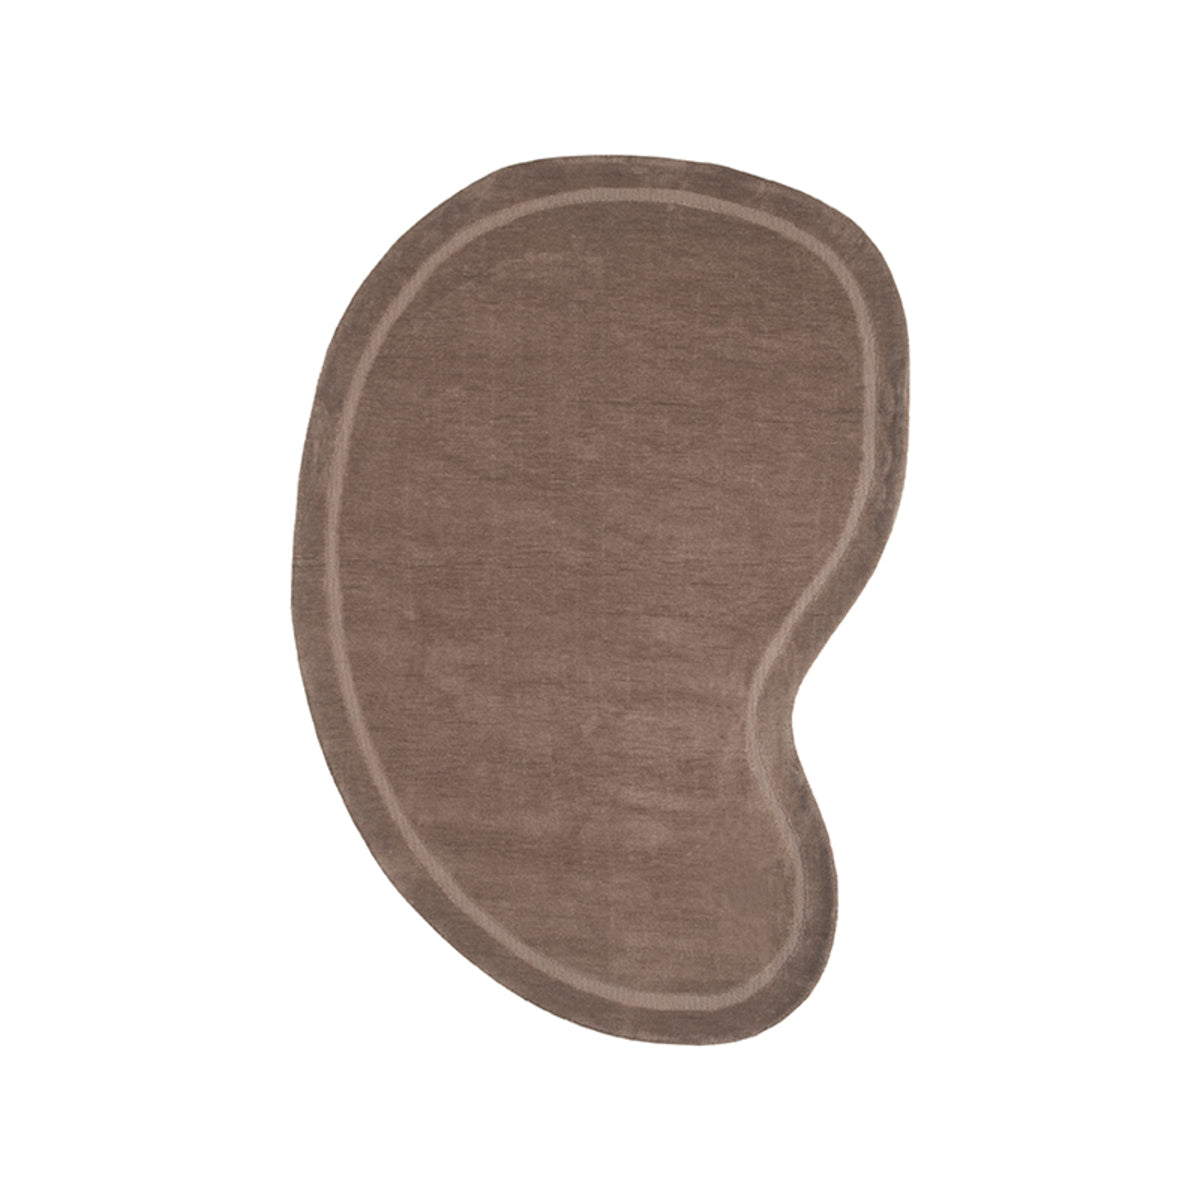 LABEL51 Rugs Mody - Taupe - Synthetic - 160x230 cm